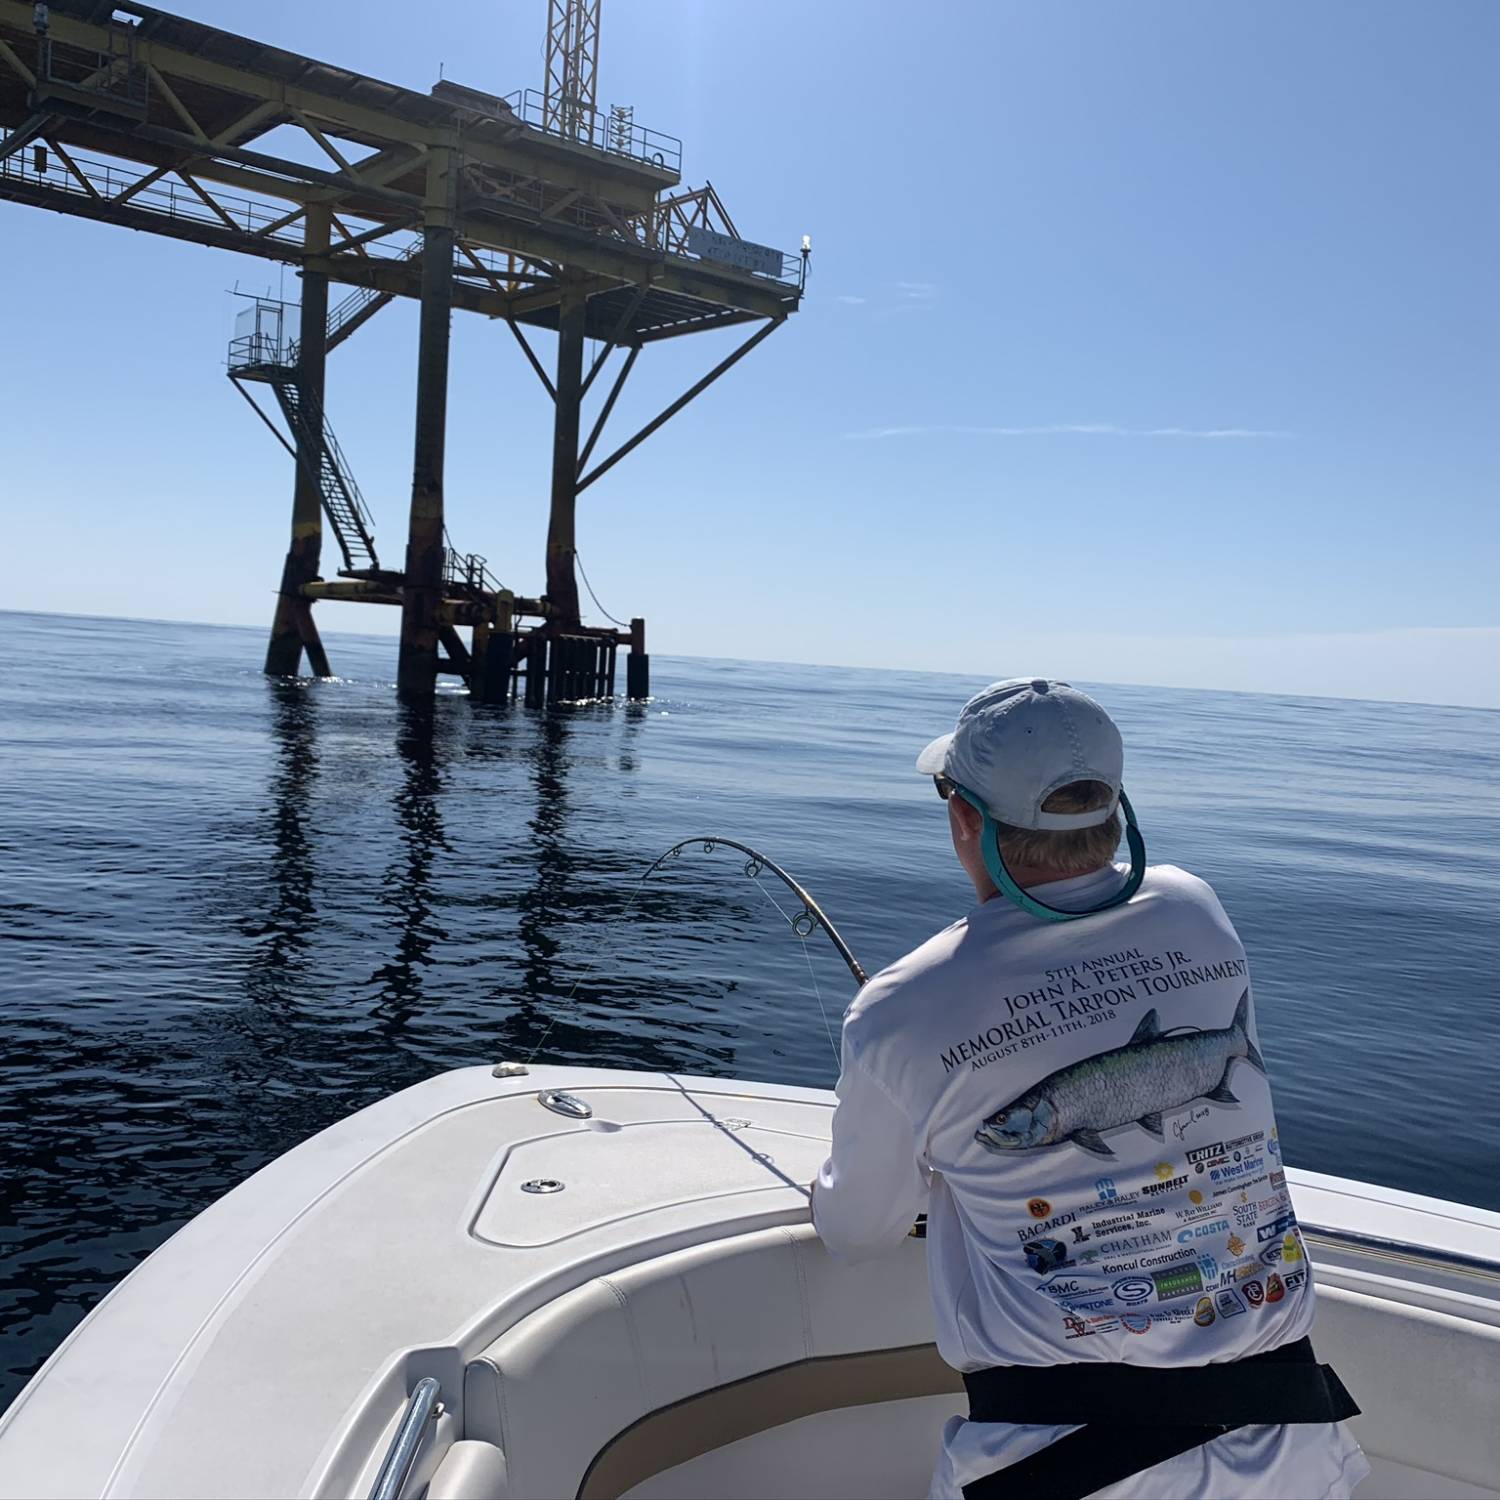 Title: Fighting Amberjack off the tower - On board their Sportsman Open 302 Center Console - Location: Bluffton, SC. Participating in the Photo Contest #SportsmanMarch2023